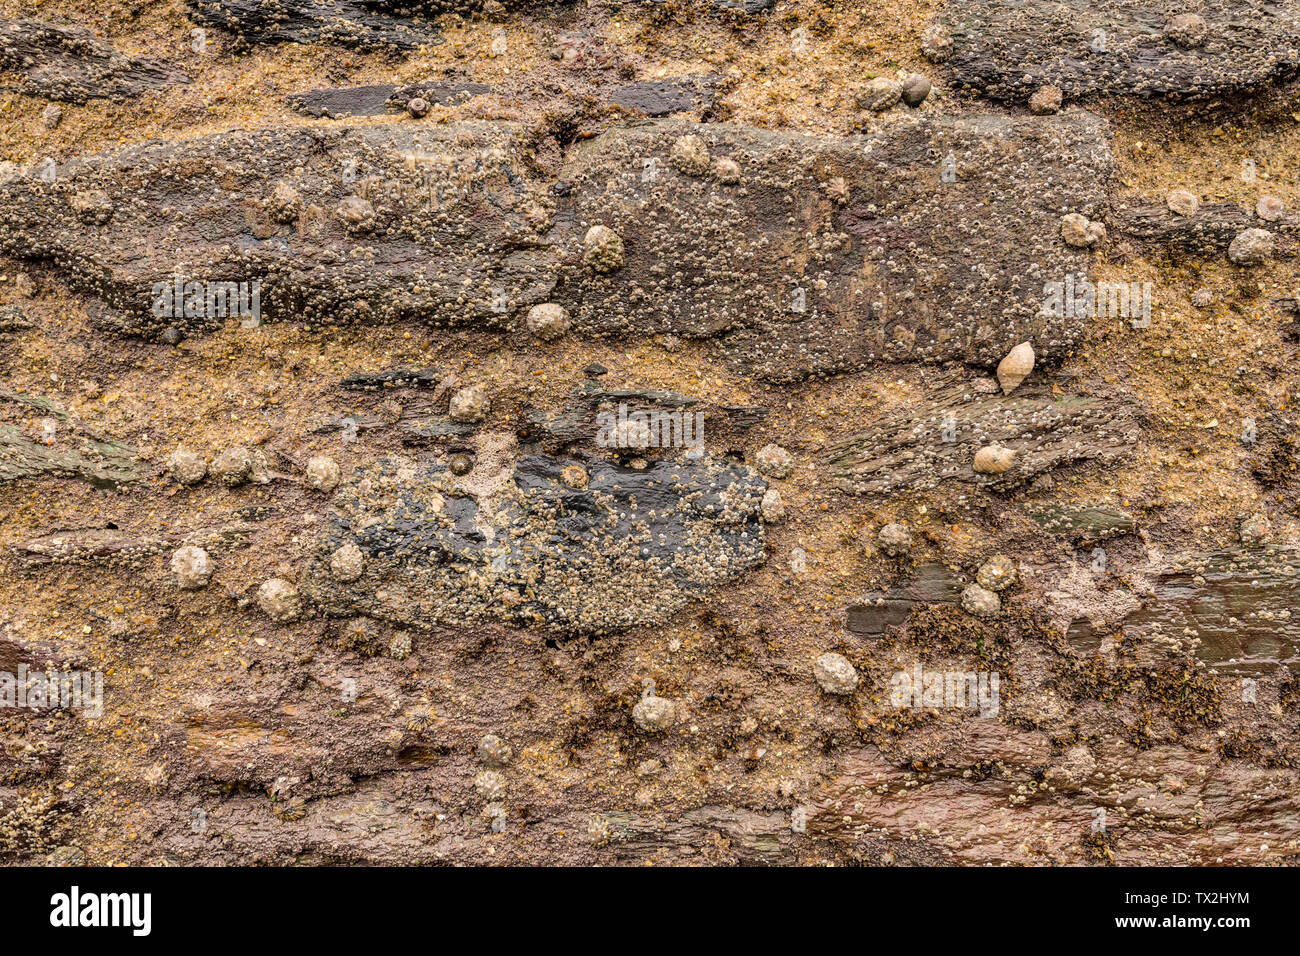 Limpets & Barnacles on dock wall Stock Photo